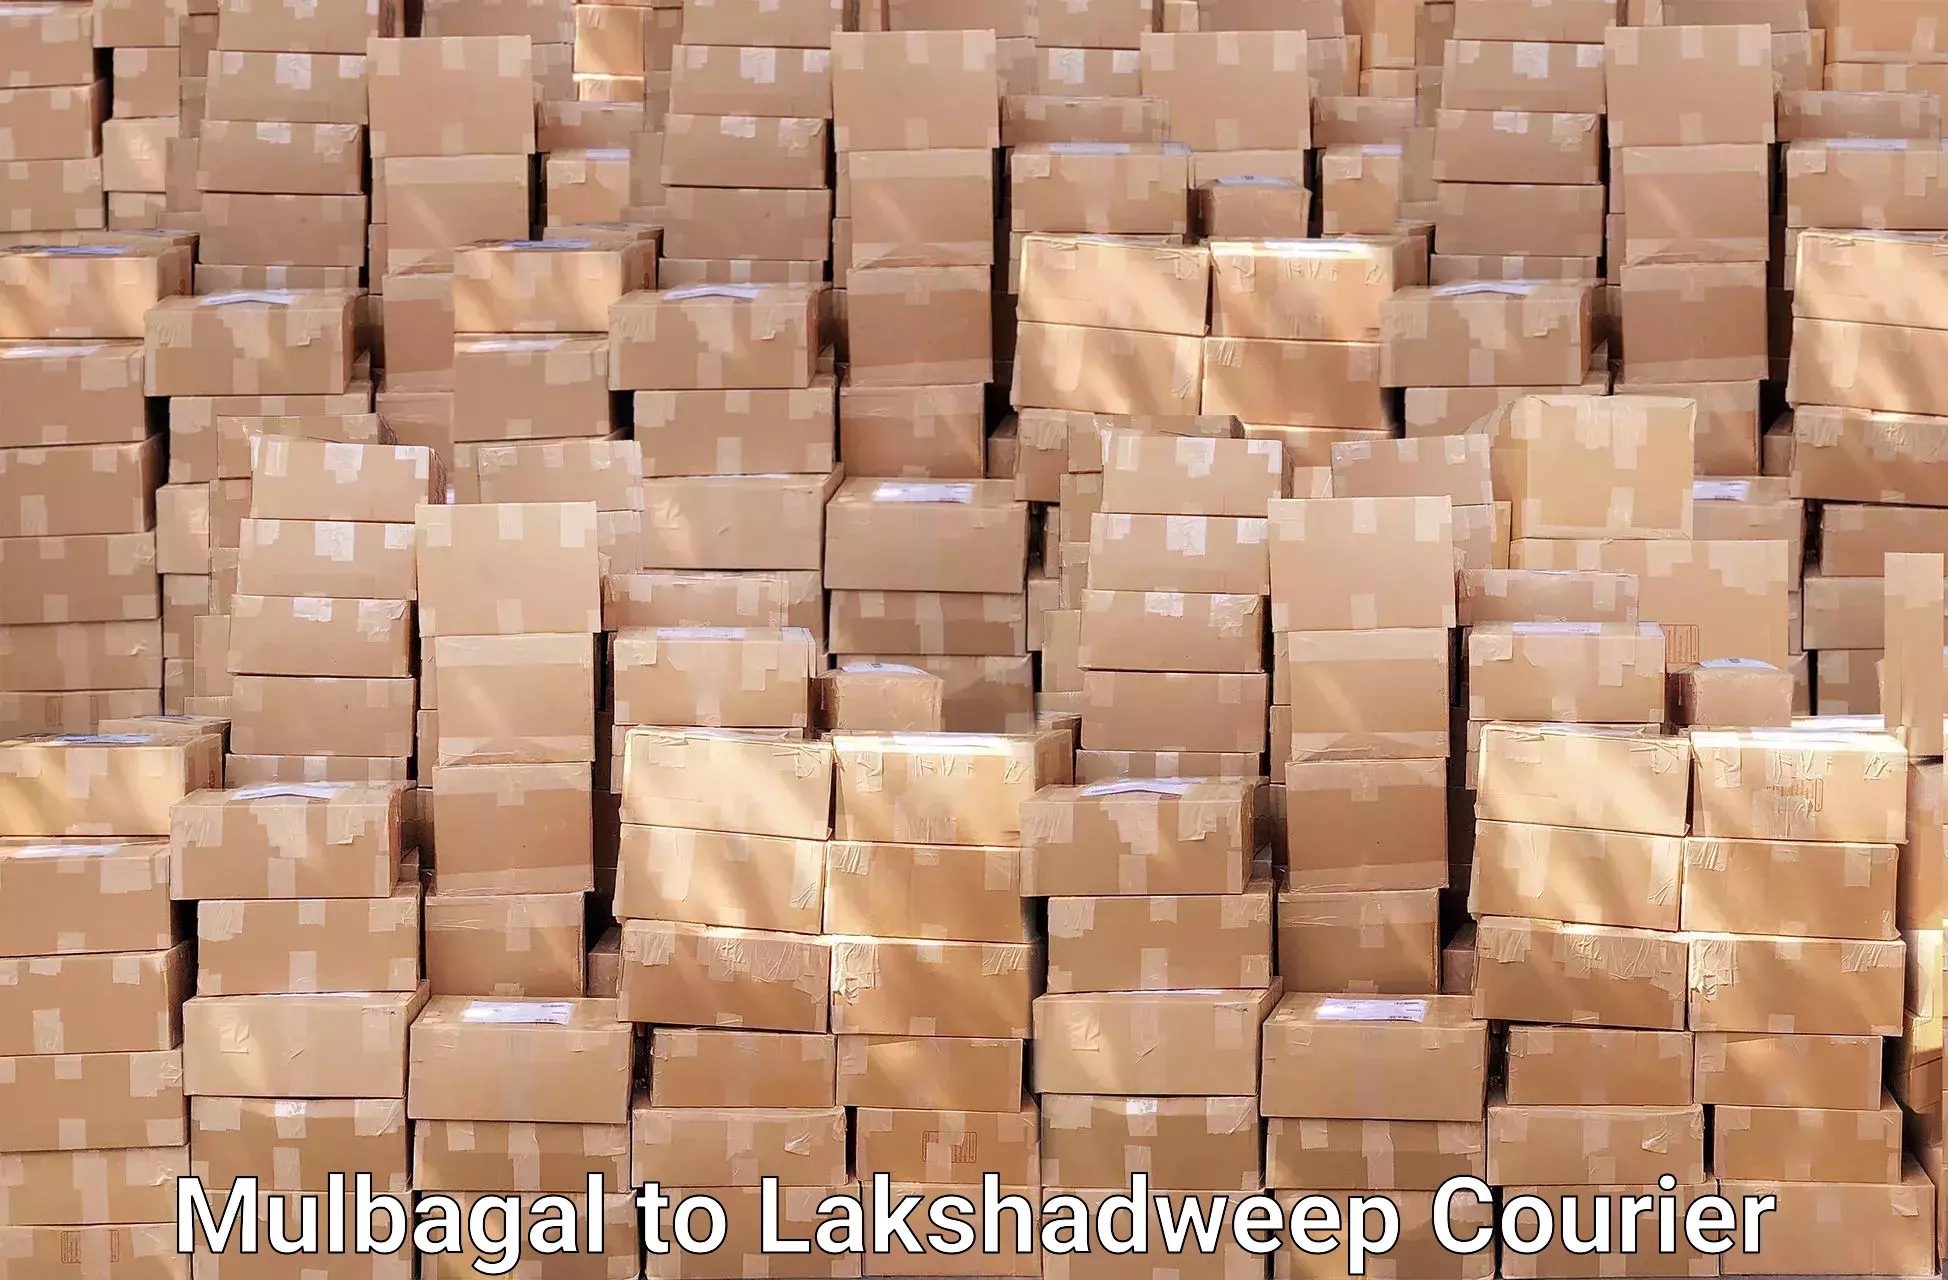 Efficient relocation services Mulbagal to Lakshadweep